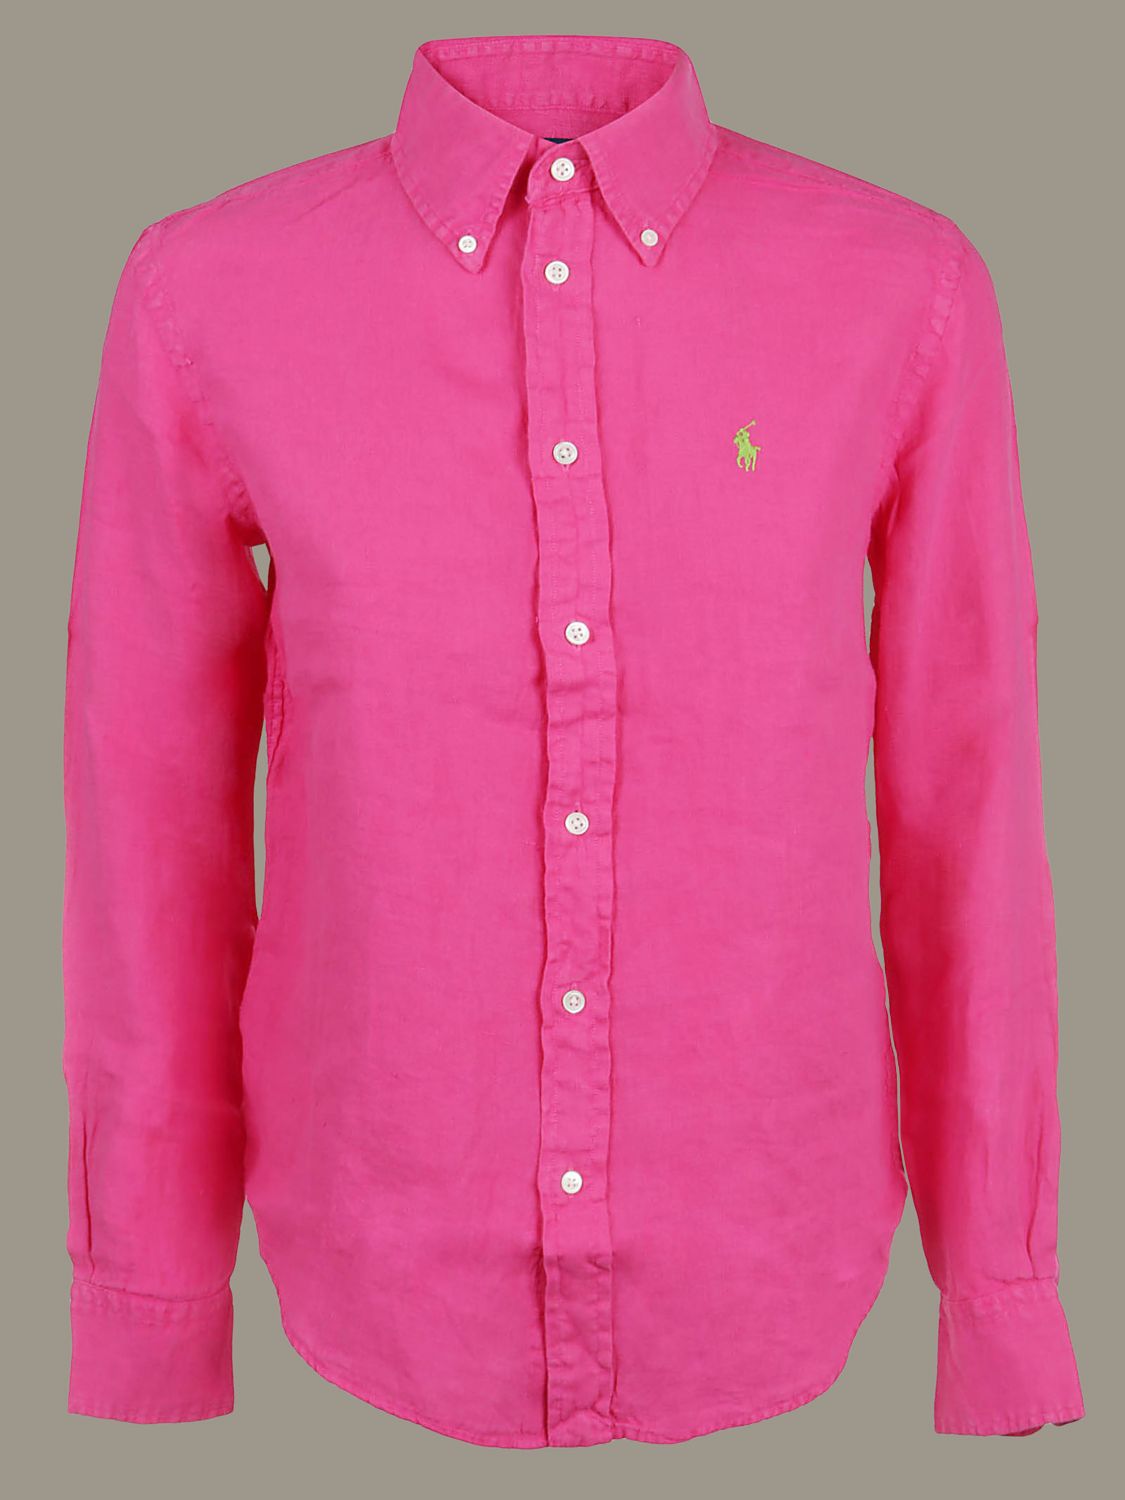 Polo Ralph Lauren Outlet: shirt with button-down collar - Pink | Polo Ralph  Lauren shirt 211780617 online on 